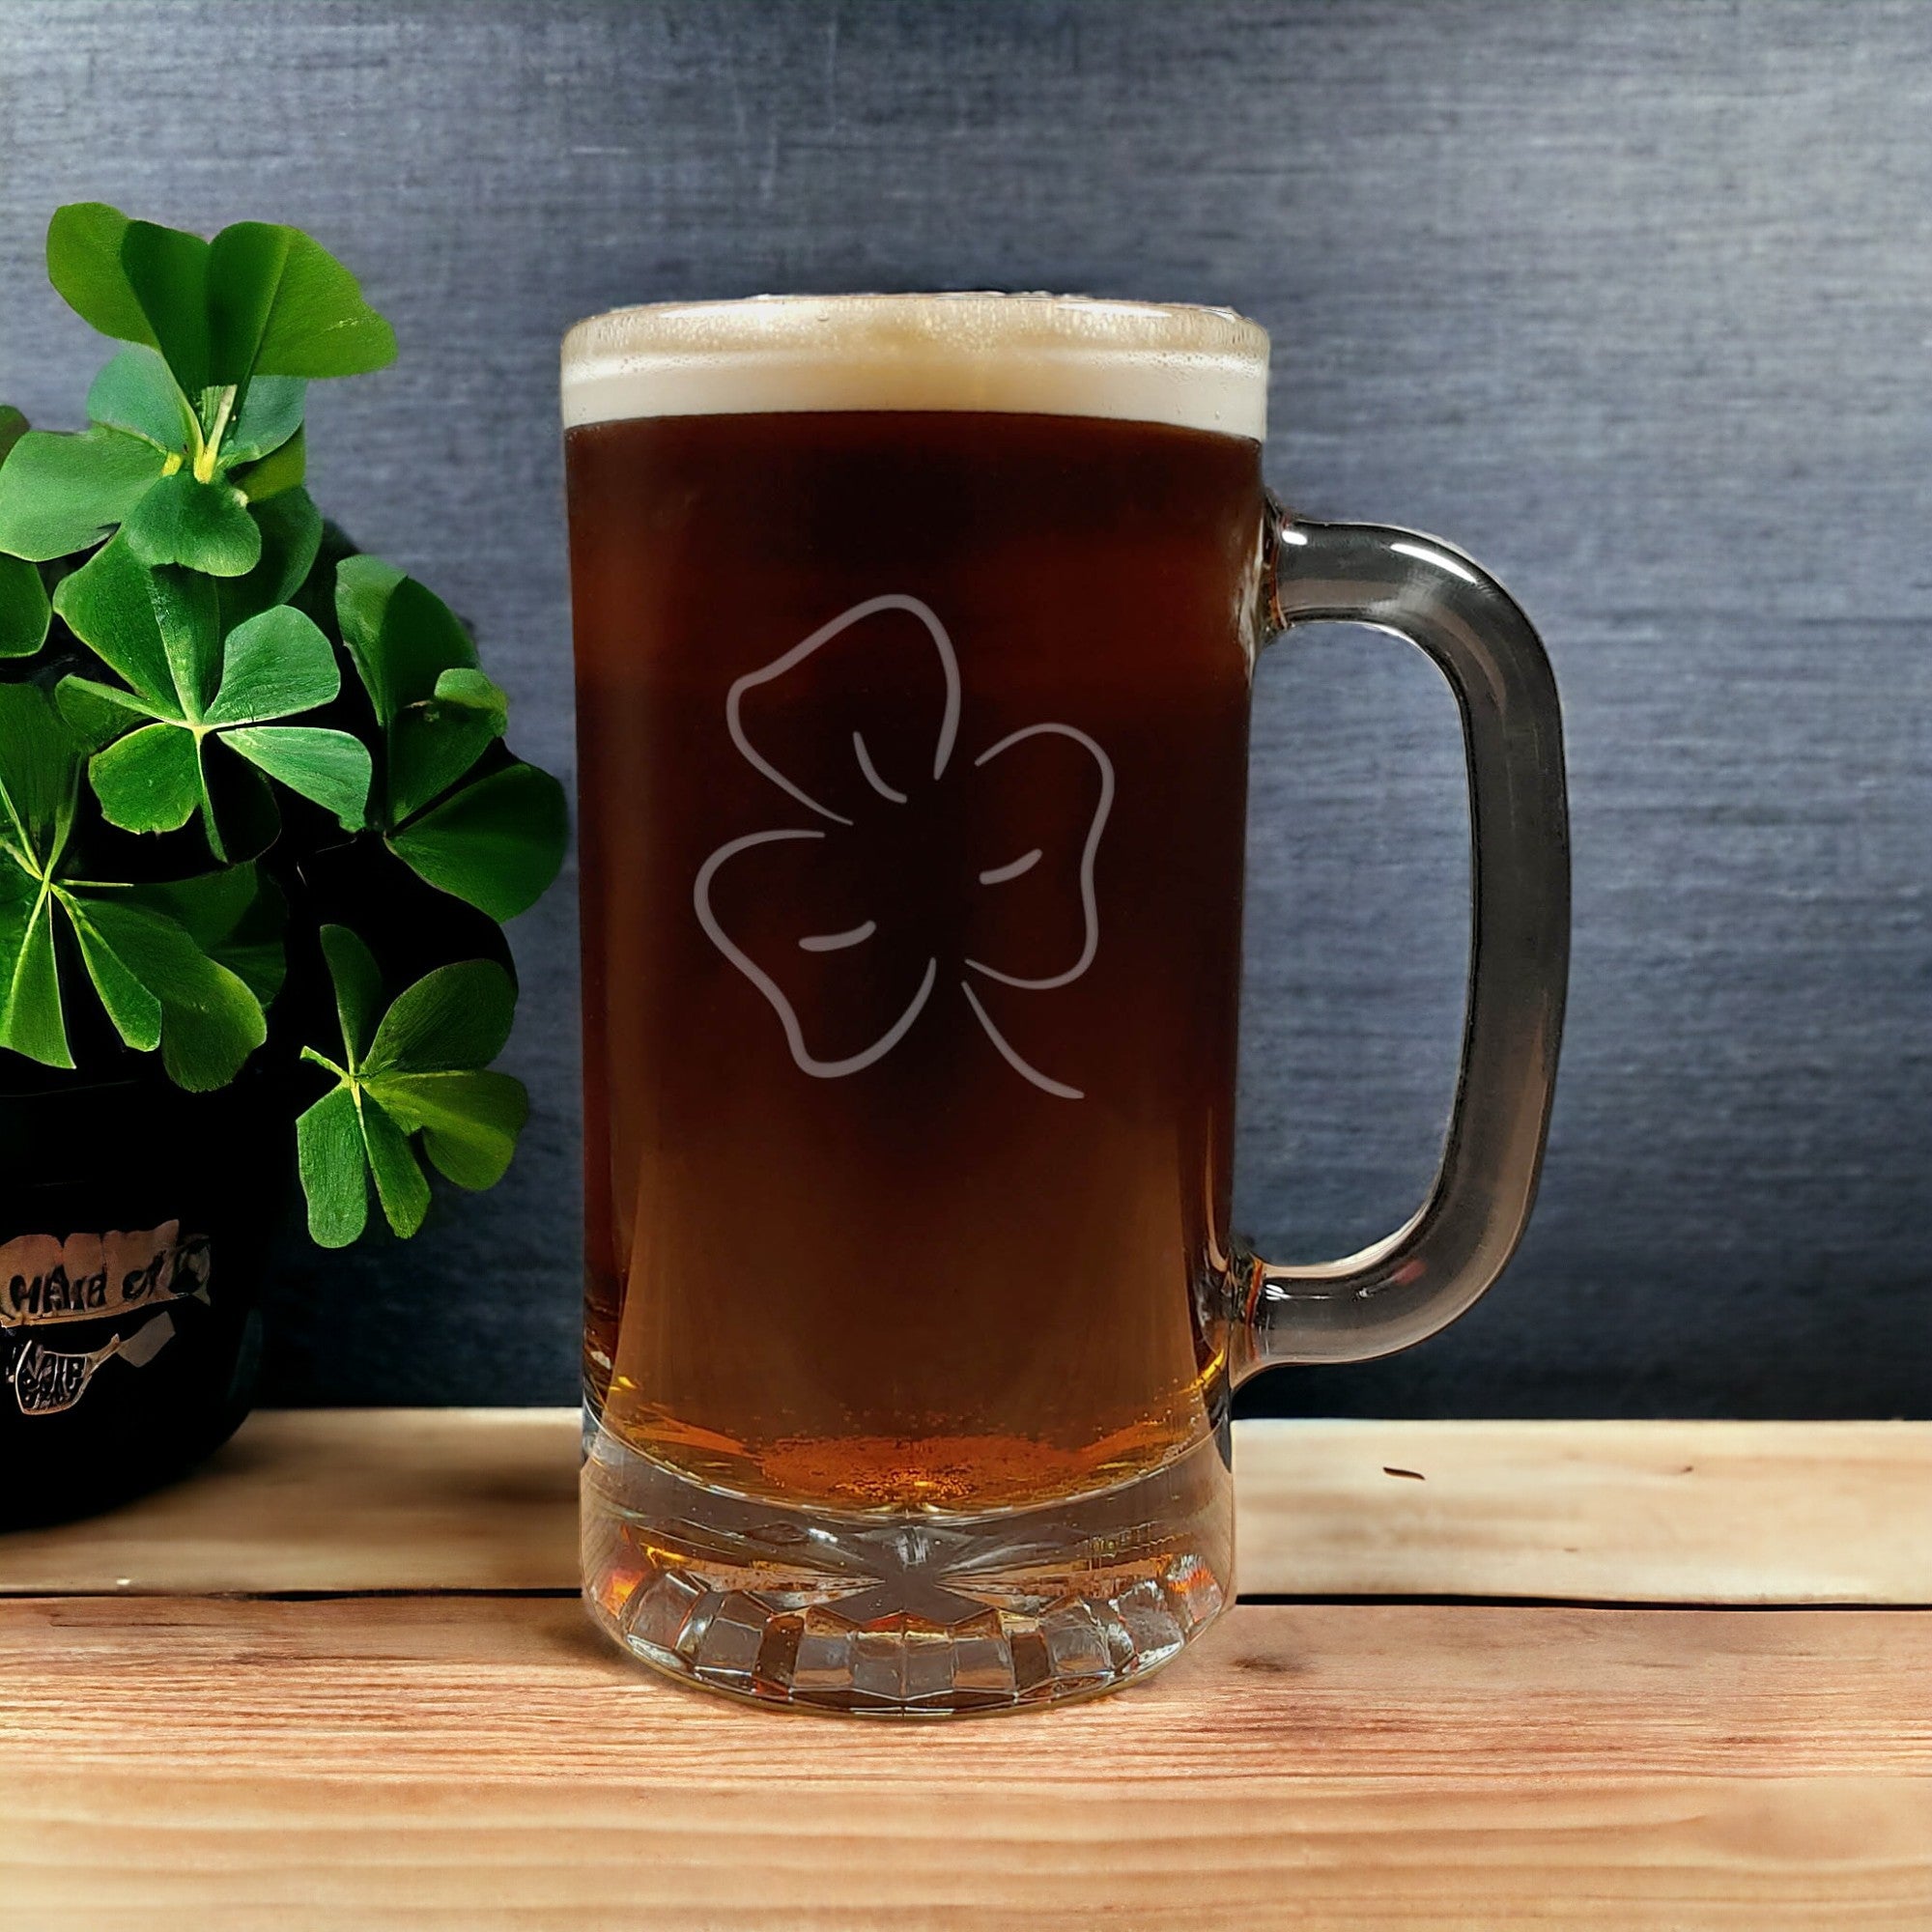 Shamrock 16oz Engraved Beer Mug - St. Patrick's Day Personalized Gift - copyright Hues in Glass